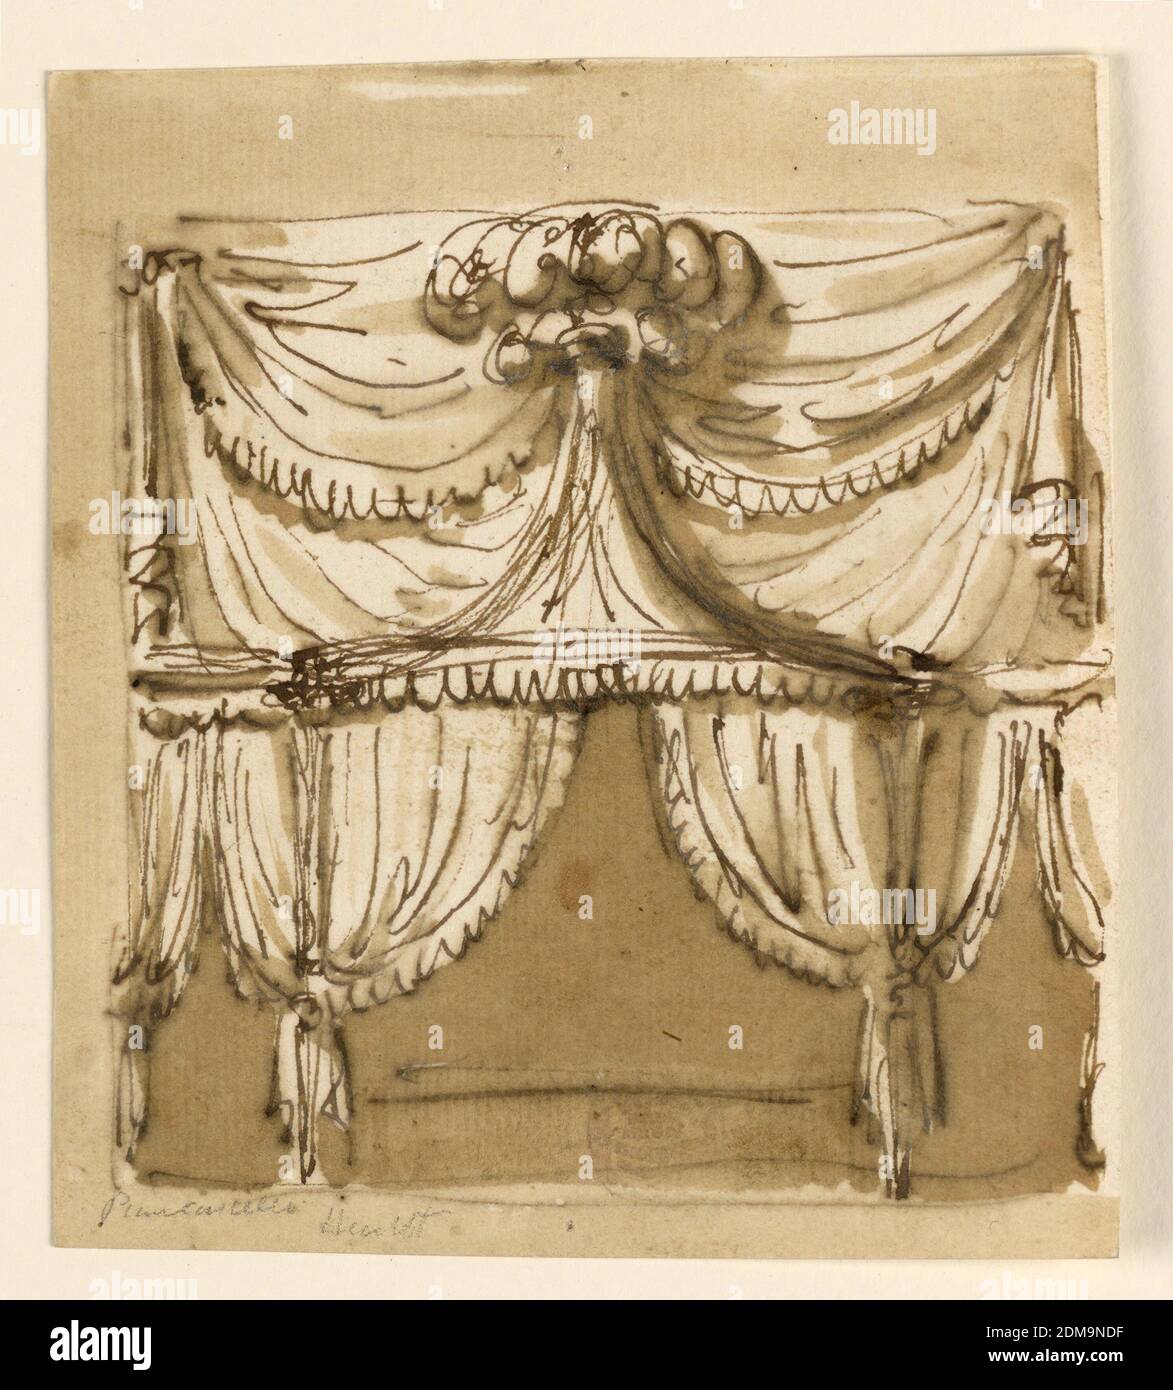 Elevation of an Alcove, Pen and brown ink, brush and brown wash on off-white laid paper, lined, Tented alcove. The central portion is circular and lateral ones straight. Supported by two posts. The roof is pointed, with a cresting of feathers. The wall behind is draped with textiles., Italy, ca. 1790, interiors, Drawing Stock Photo